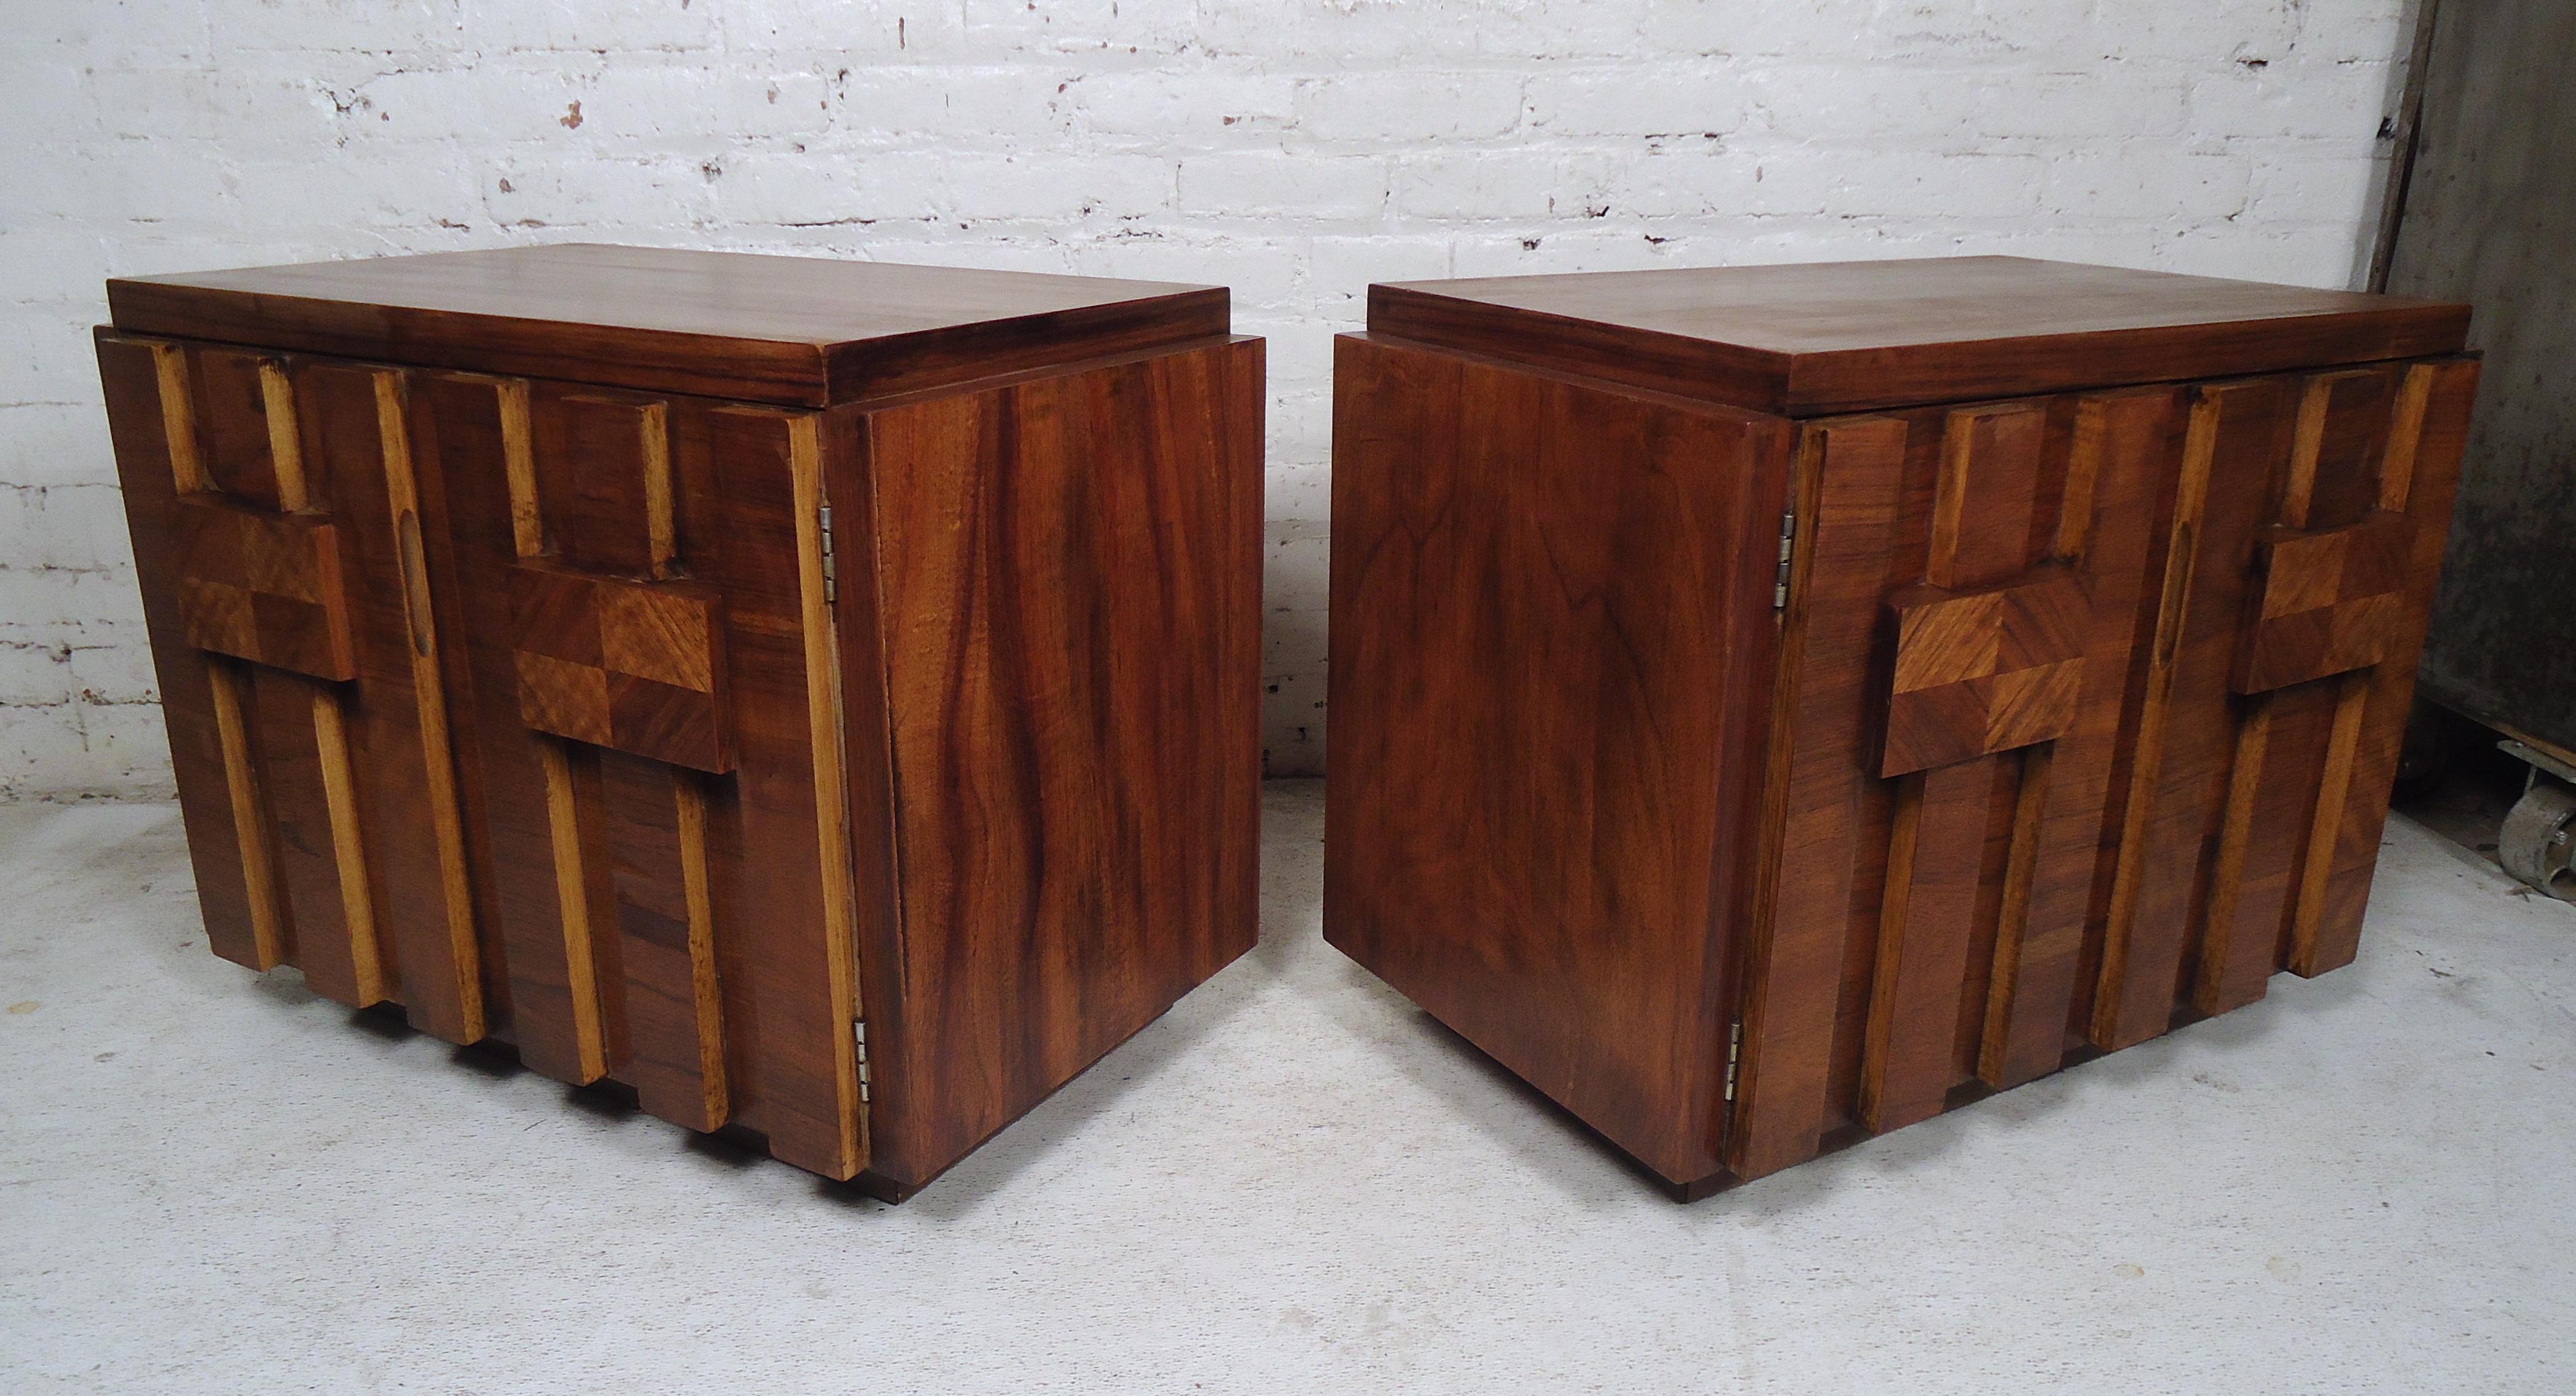 This gorgeous pair of vintage modern nightstands offer plenty of room for storage within its two large compartments and shelves. Quality construction with Brutalist cabinet door fronts. This midcentury case piece has an elegant dark walnut finish